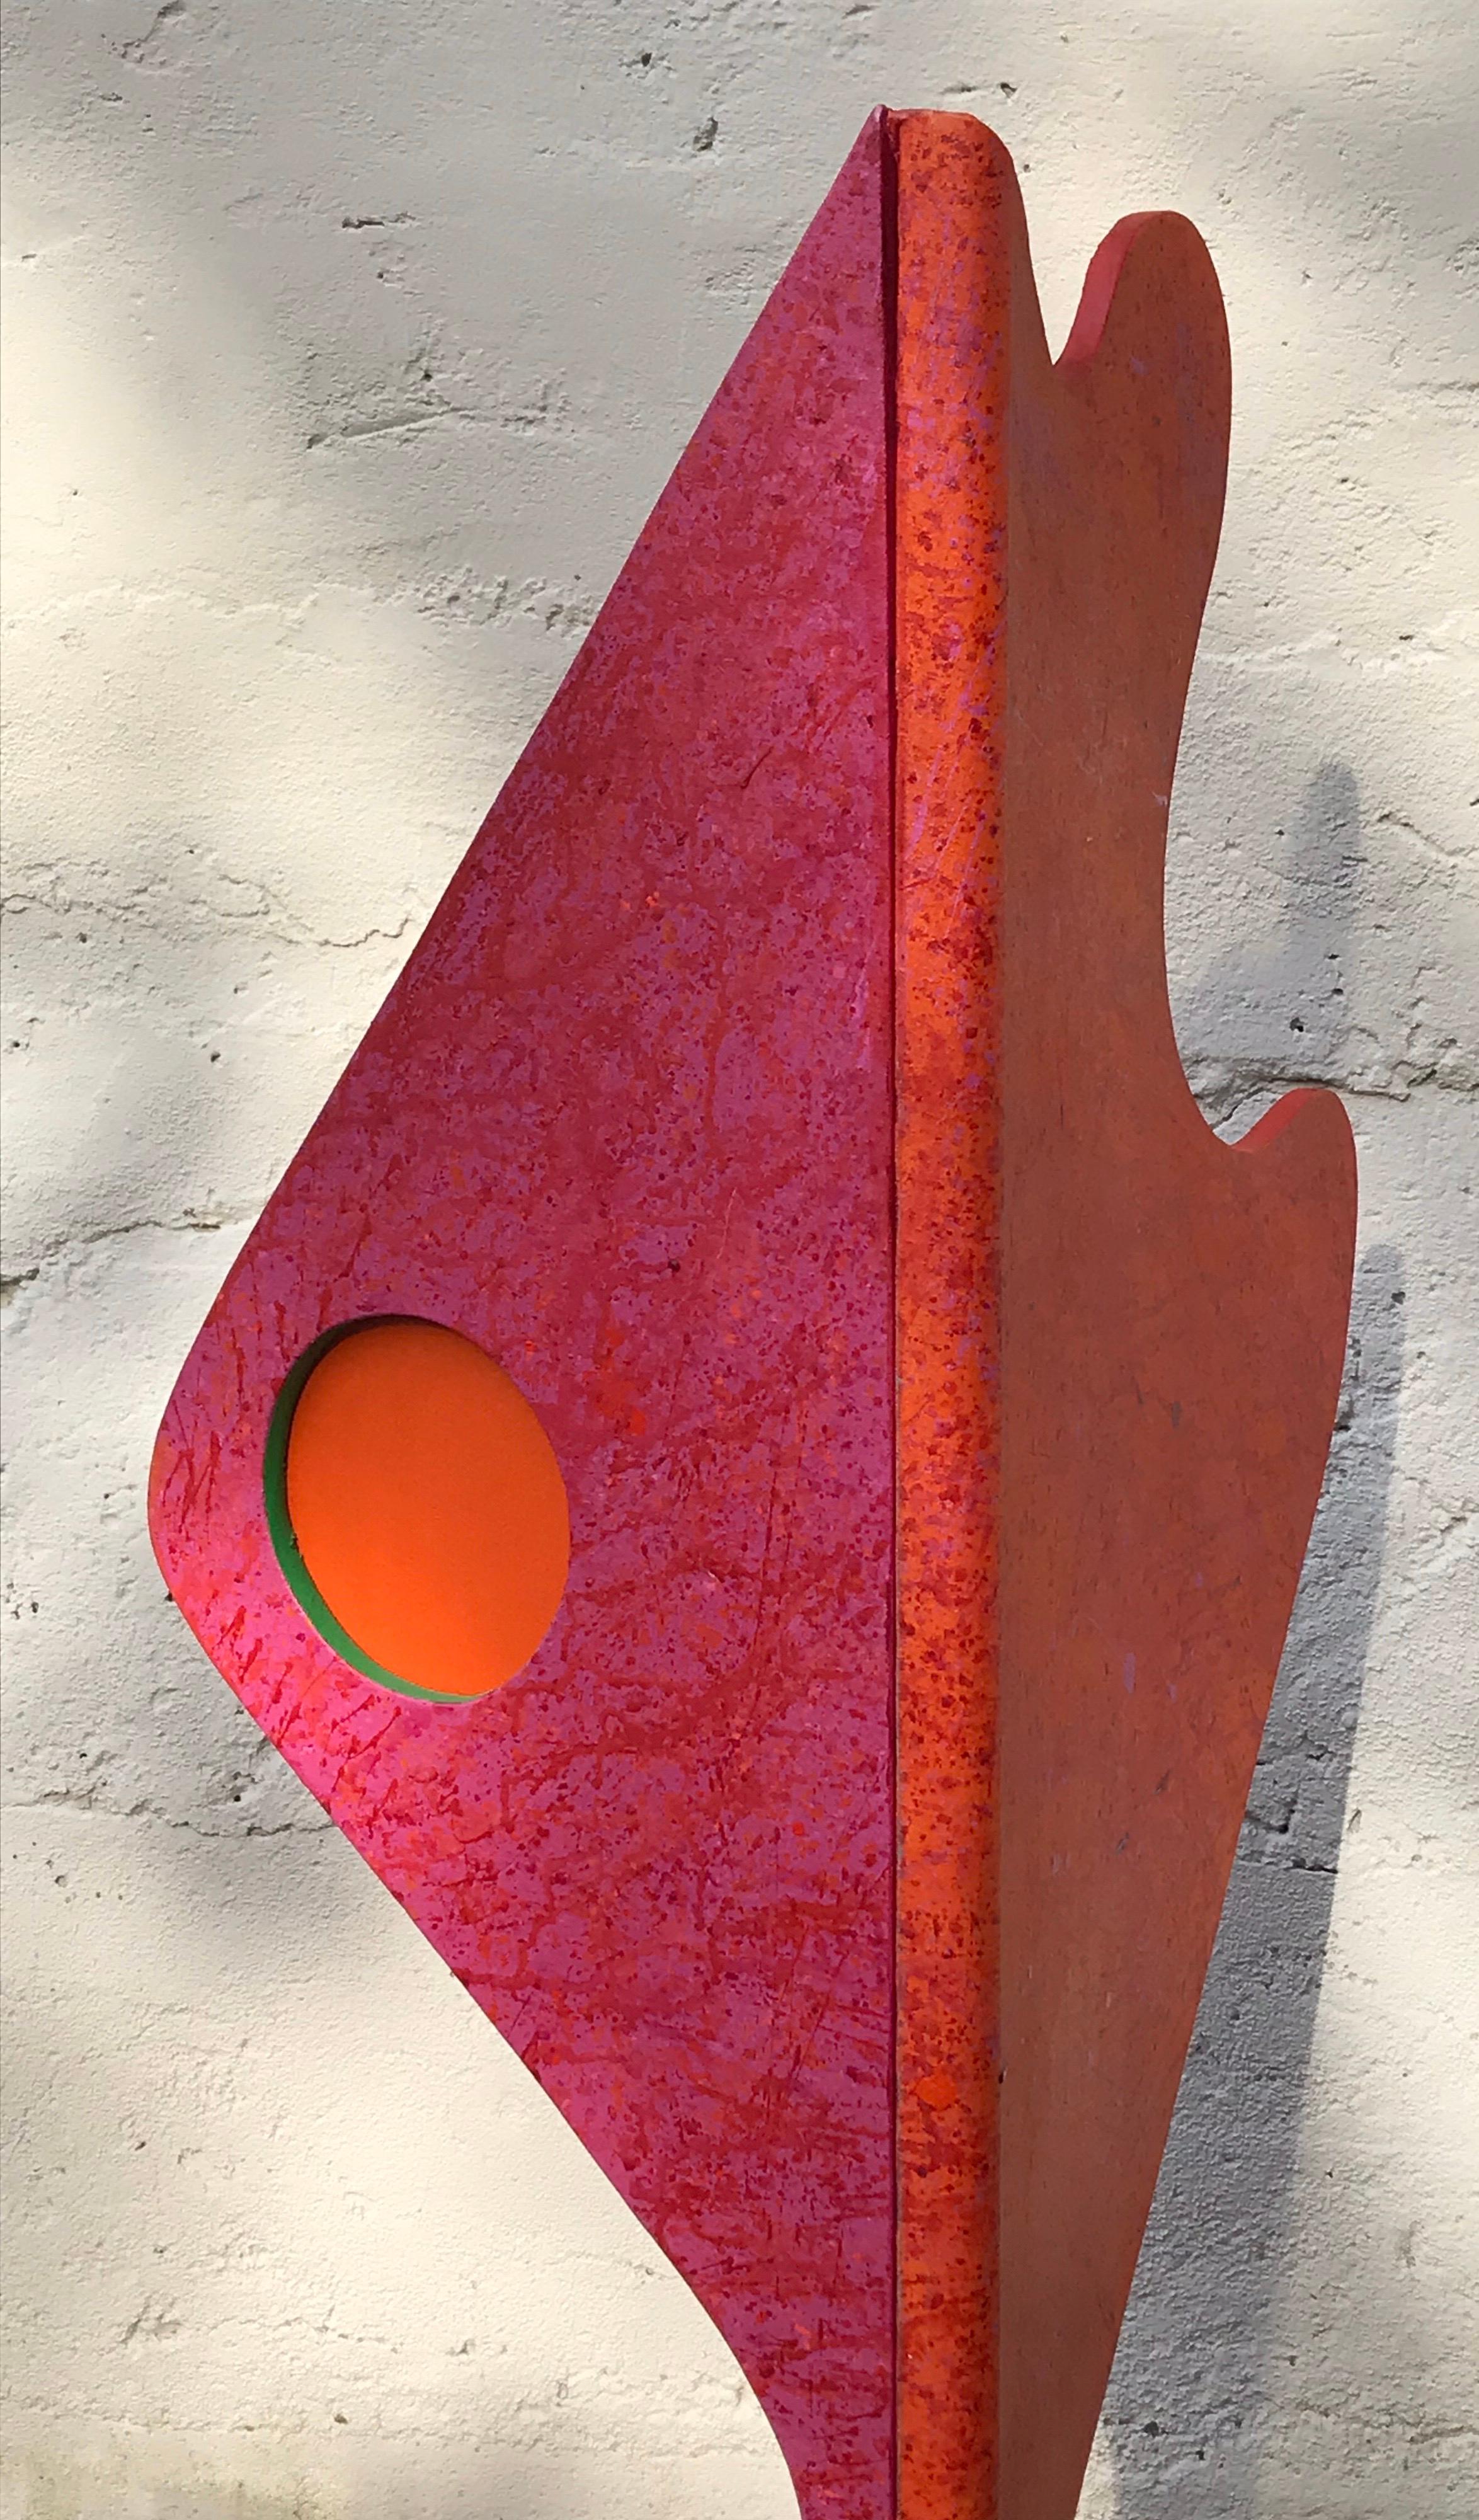 Amazing large abstract pop art free standing sculpture in the style of Memphis, Italy, 1980s
Signed Rossi 1984.